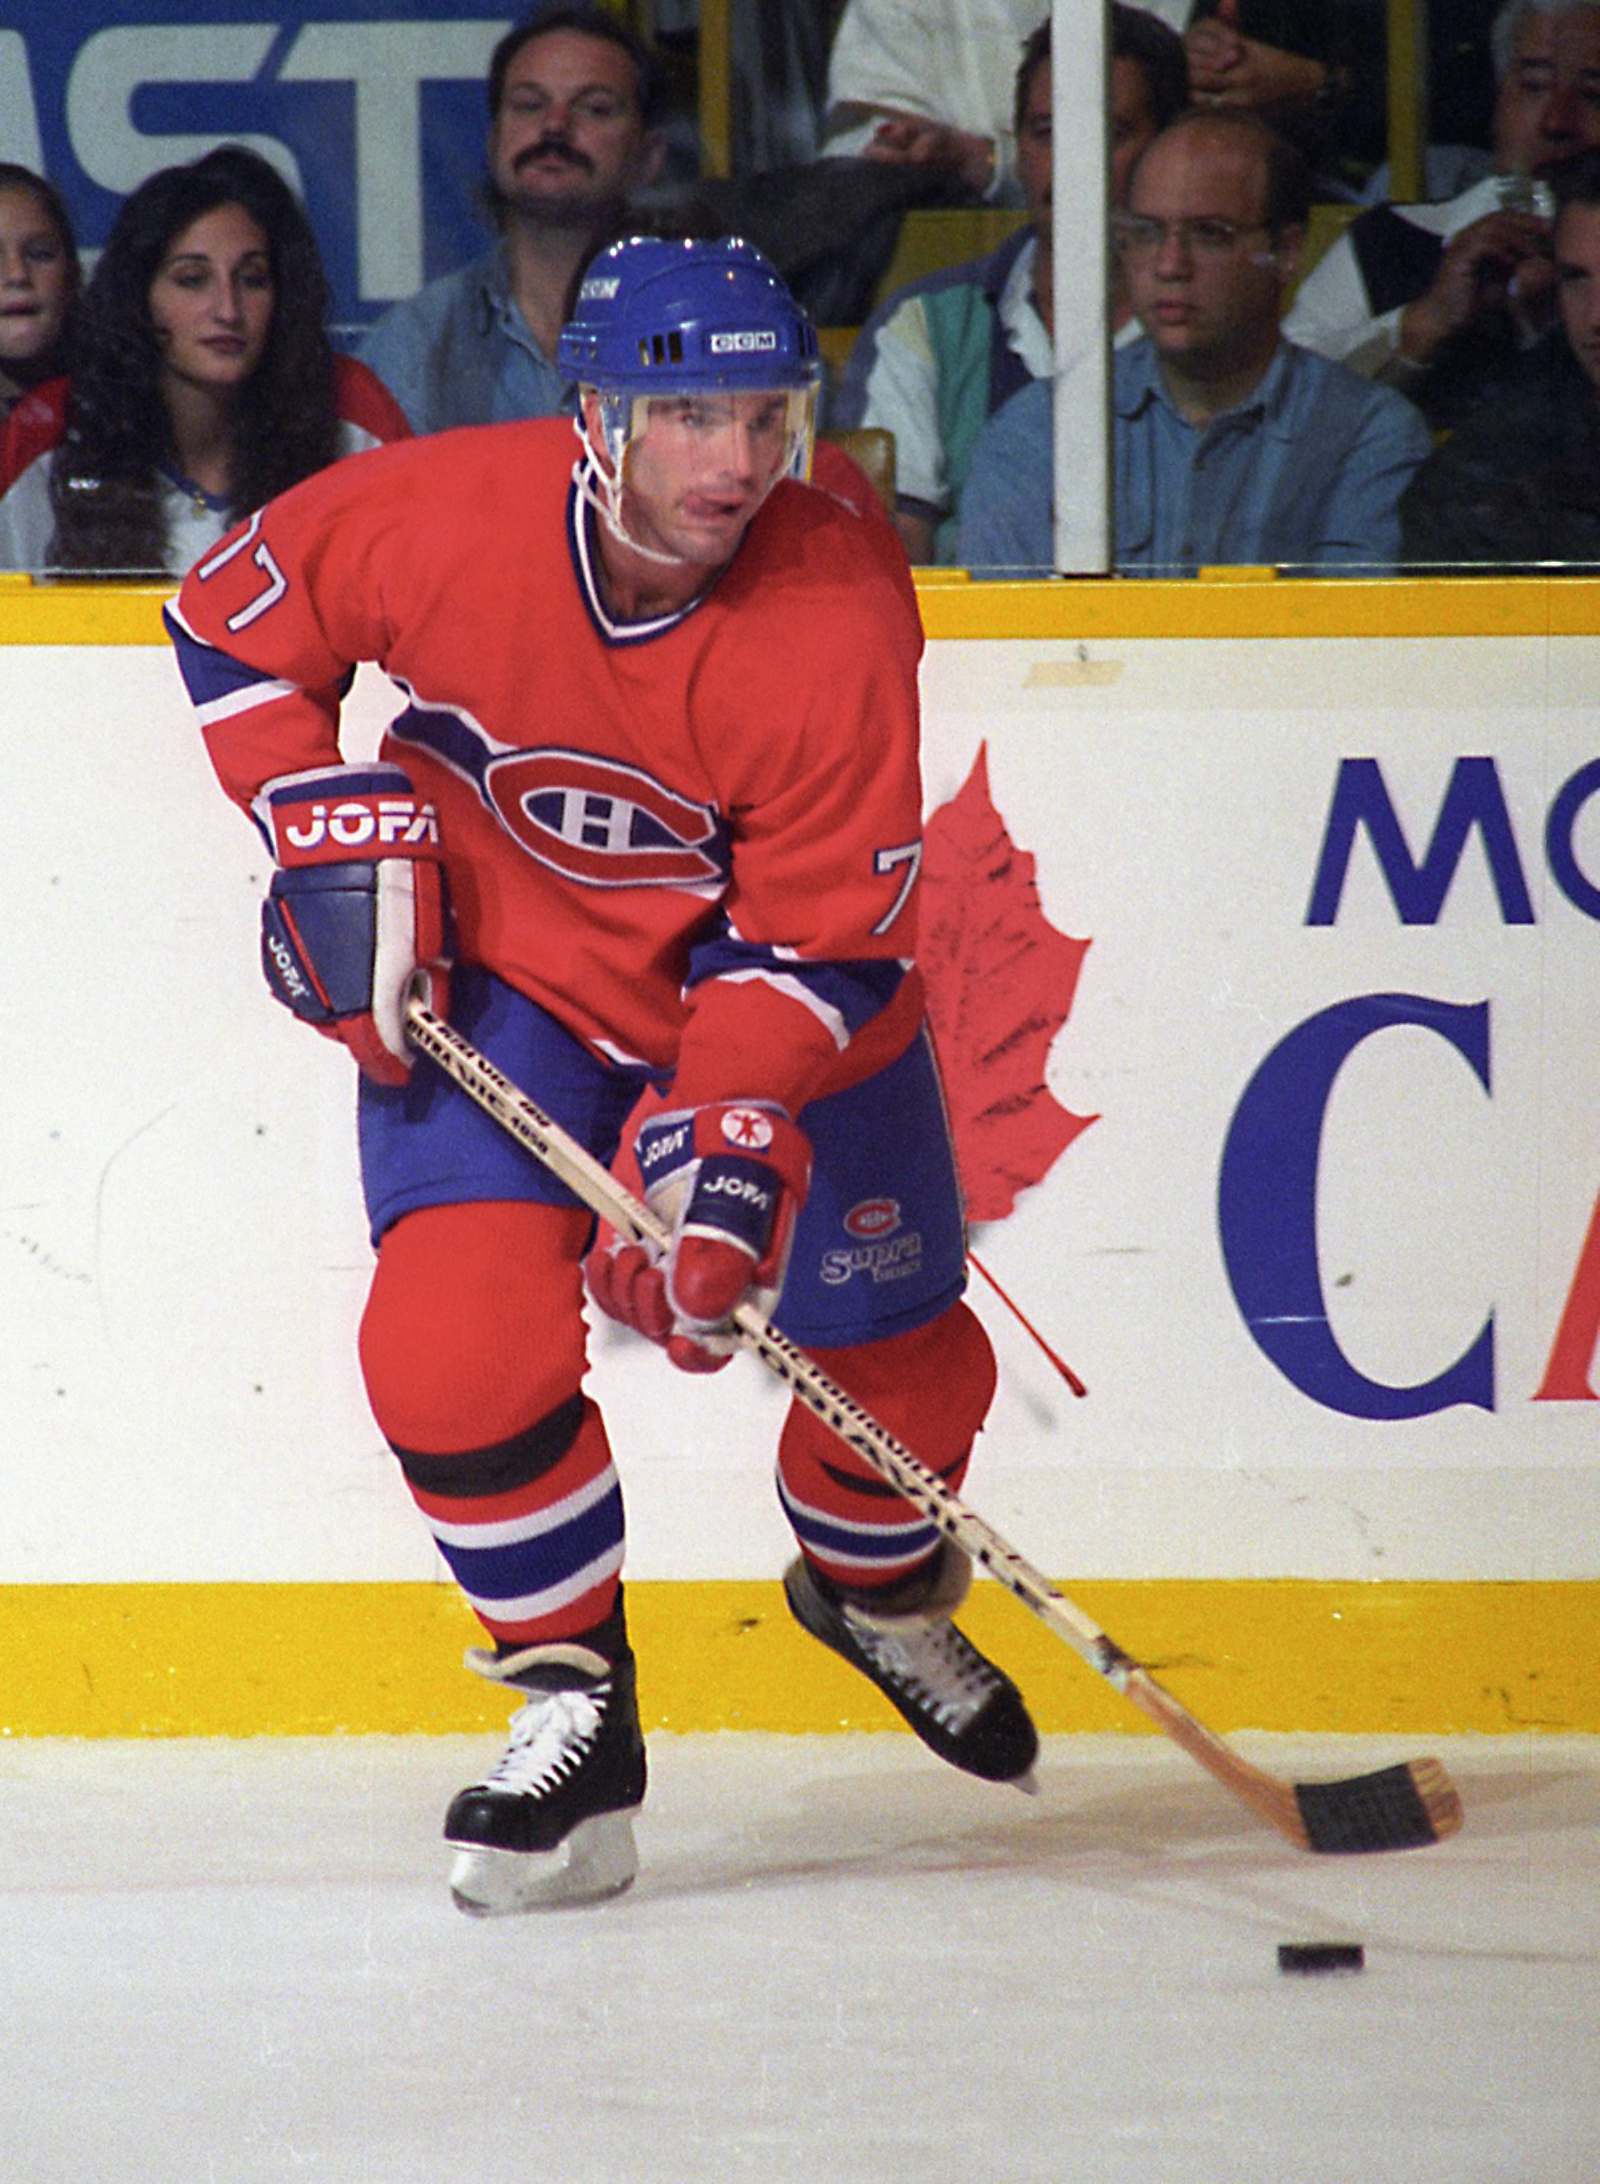 Chambers: Hockey Hall of Fame injustice to Pierre Turgeon